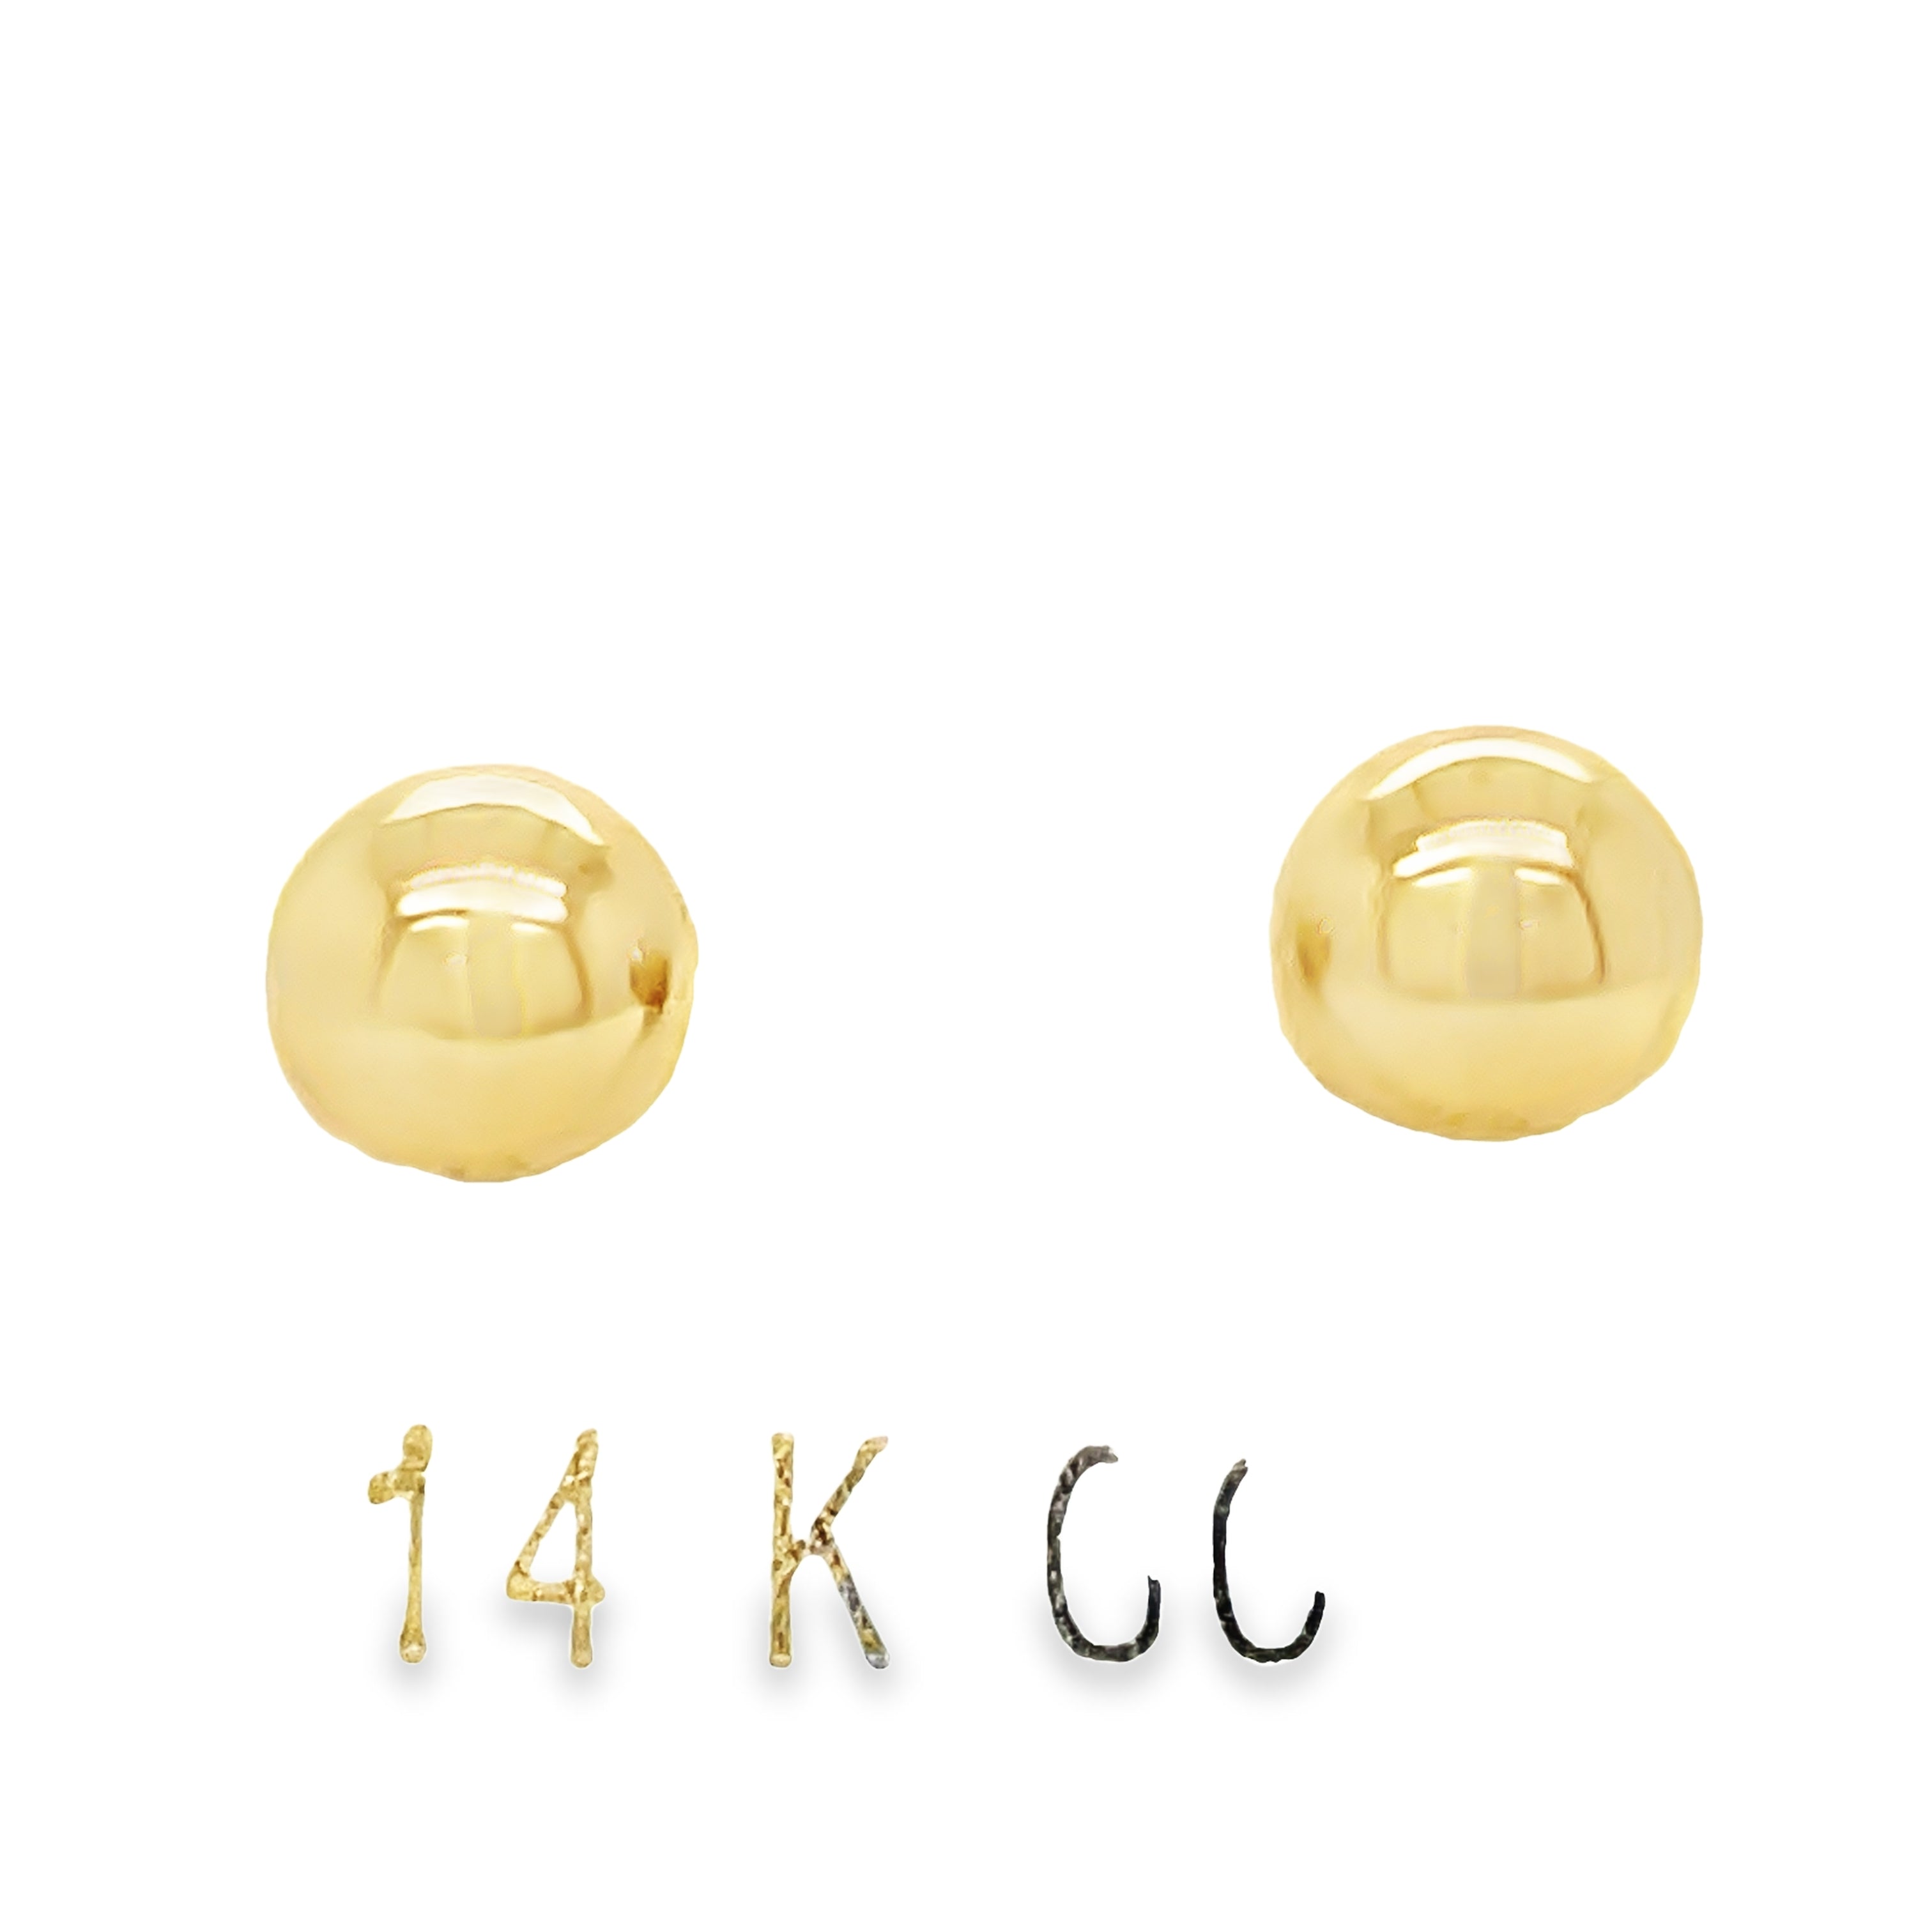 <p><span style="font-size: 0.875rem;">Elegant 14K Yellow Gold half ball earrings with secure screw backs. Beautifully crafted earrings provide the perfect finishing touch to any baby's outfit.&nbsp;</span></p> <p>&nbsp;</p>